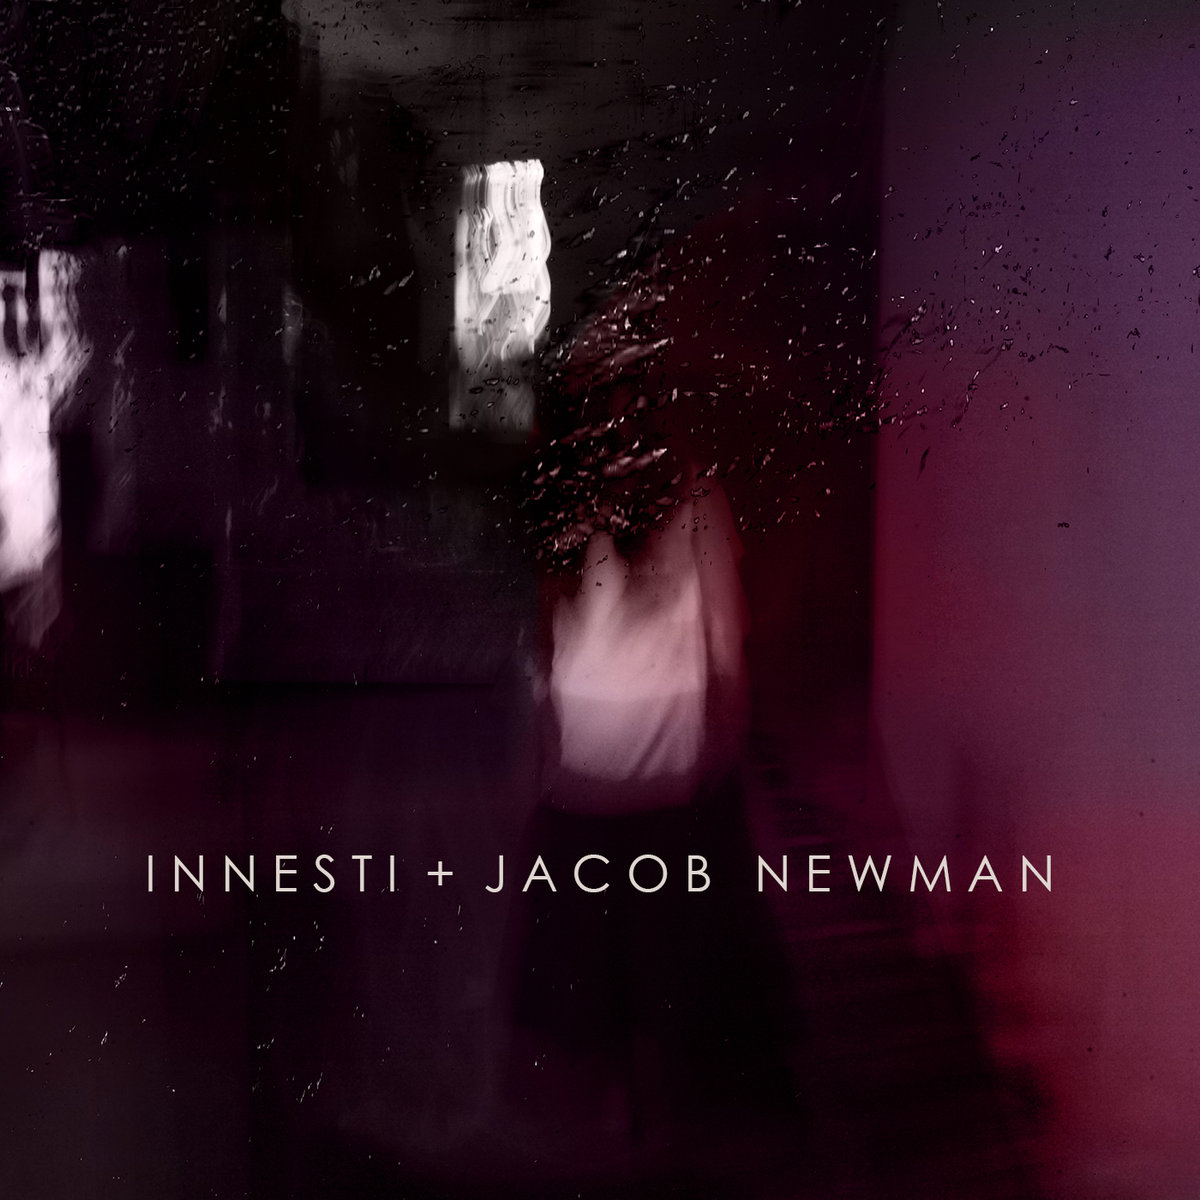 Today's work soundtrack: Innesti + Jacob Newman - Spoke of Several Beautiful, calm, dreamy, meditative ambient soundscapes. For fans of Steve Hauschildt and bvdub. Favorite track: Video dreams.  https://jacobnewman.bandcamp.com/album/spoke-of-several